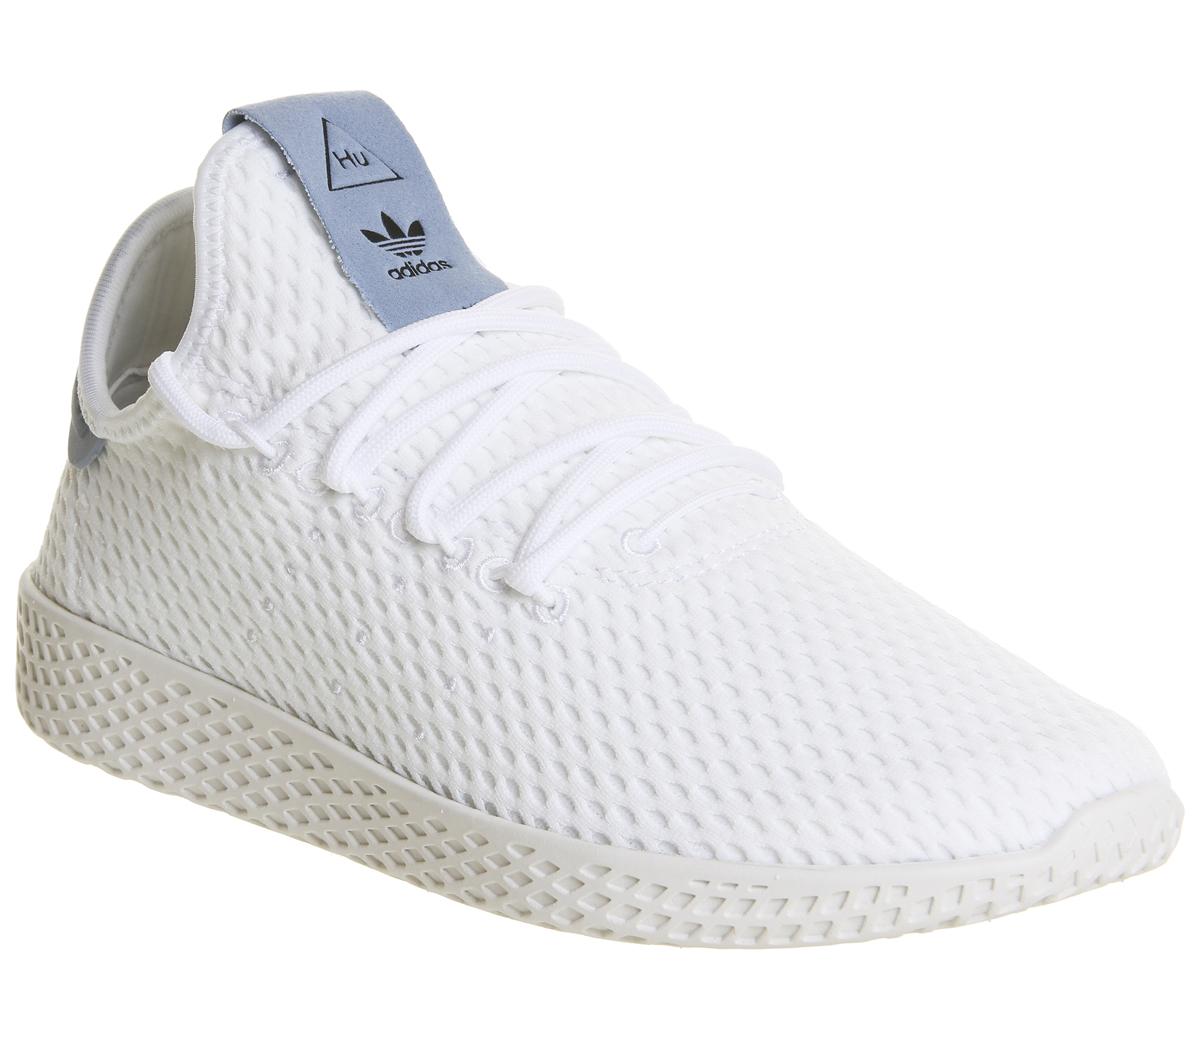 pharrell williams shoes white and blue